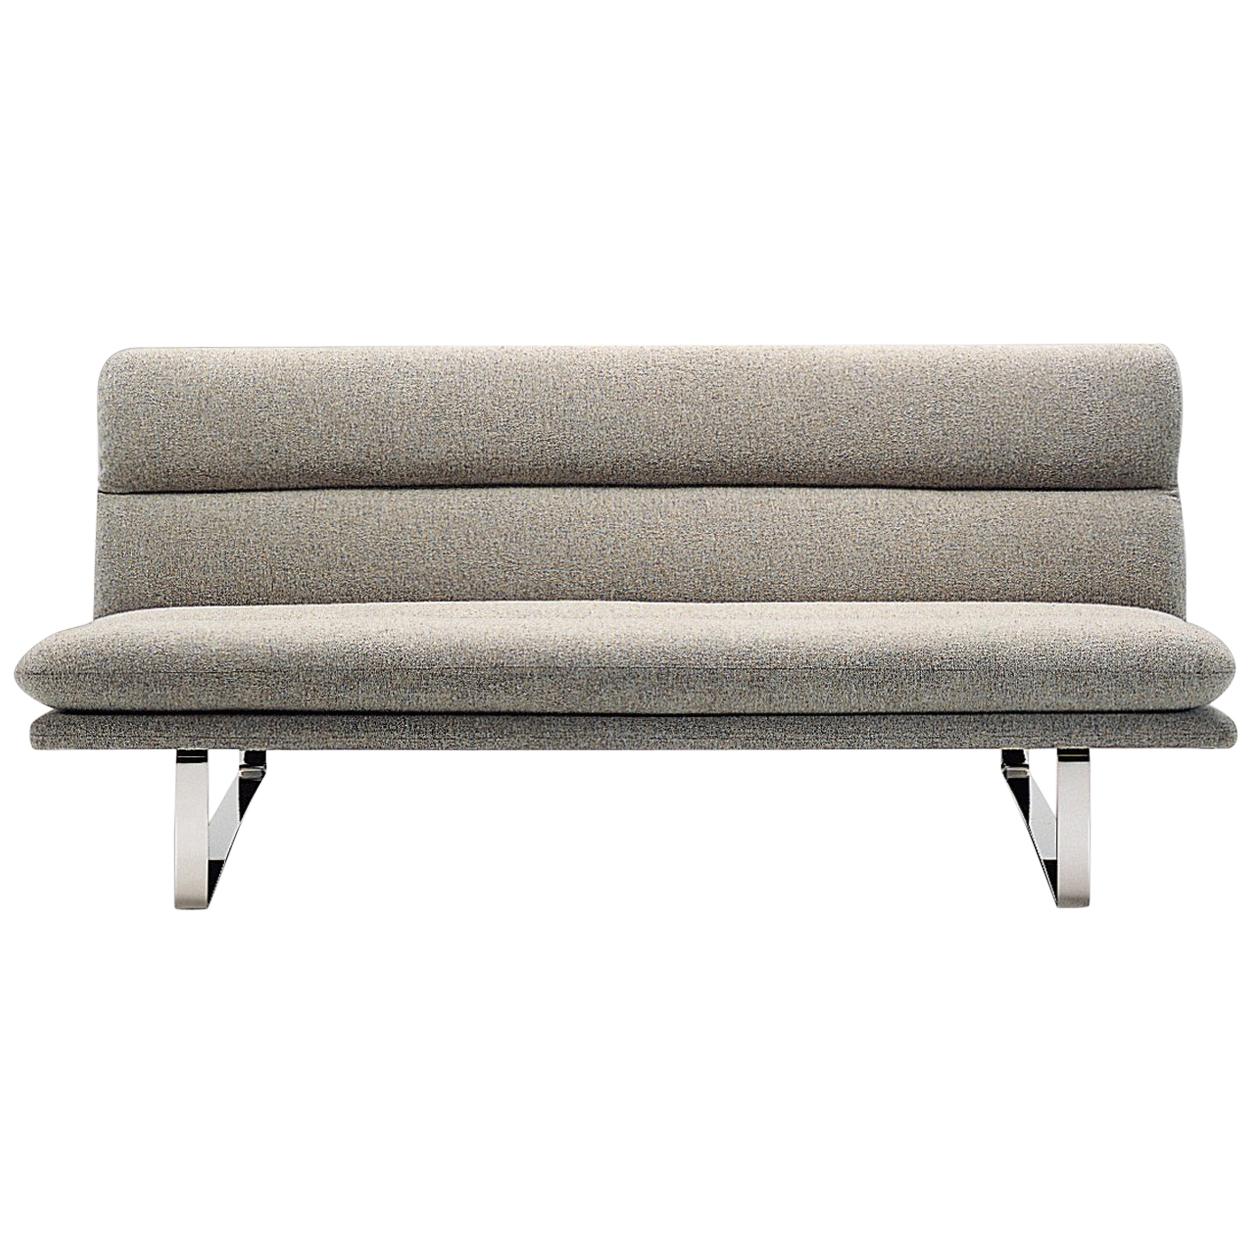 Customizable Artifort C683 Sofa  by Kho Liang Le For Sale